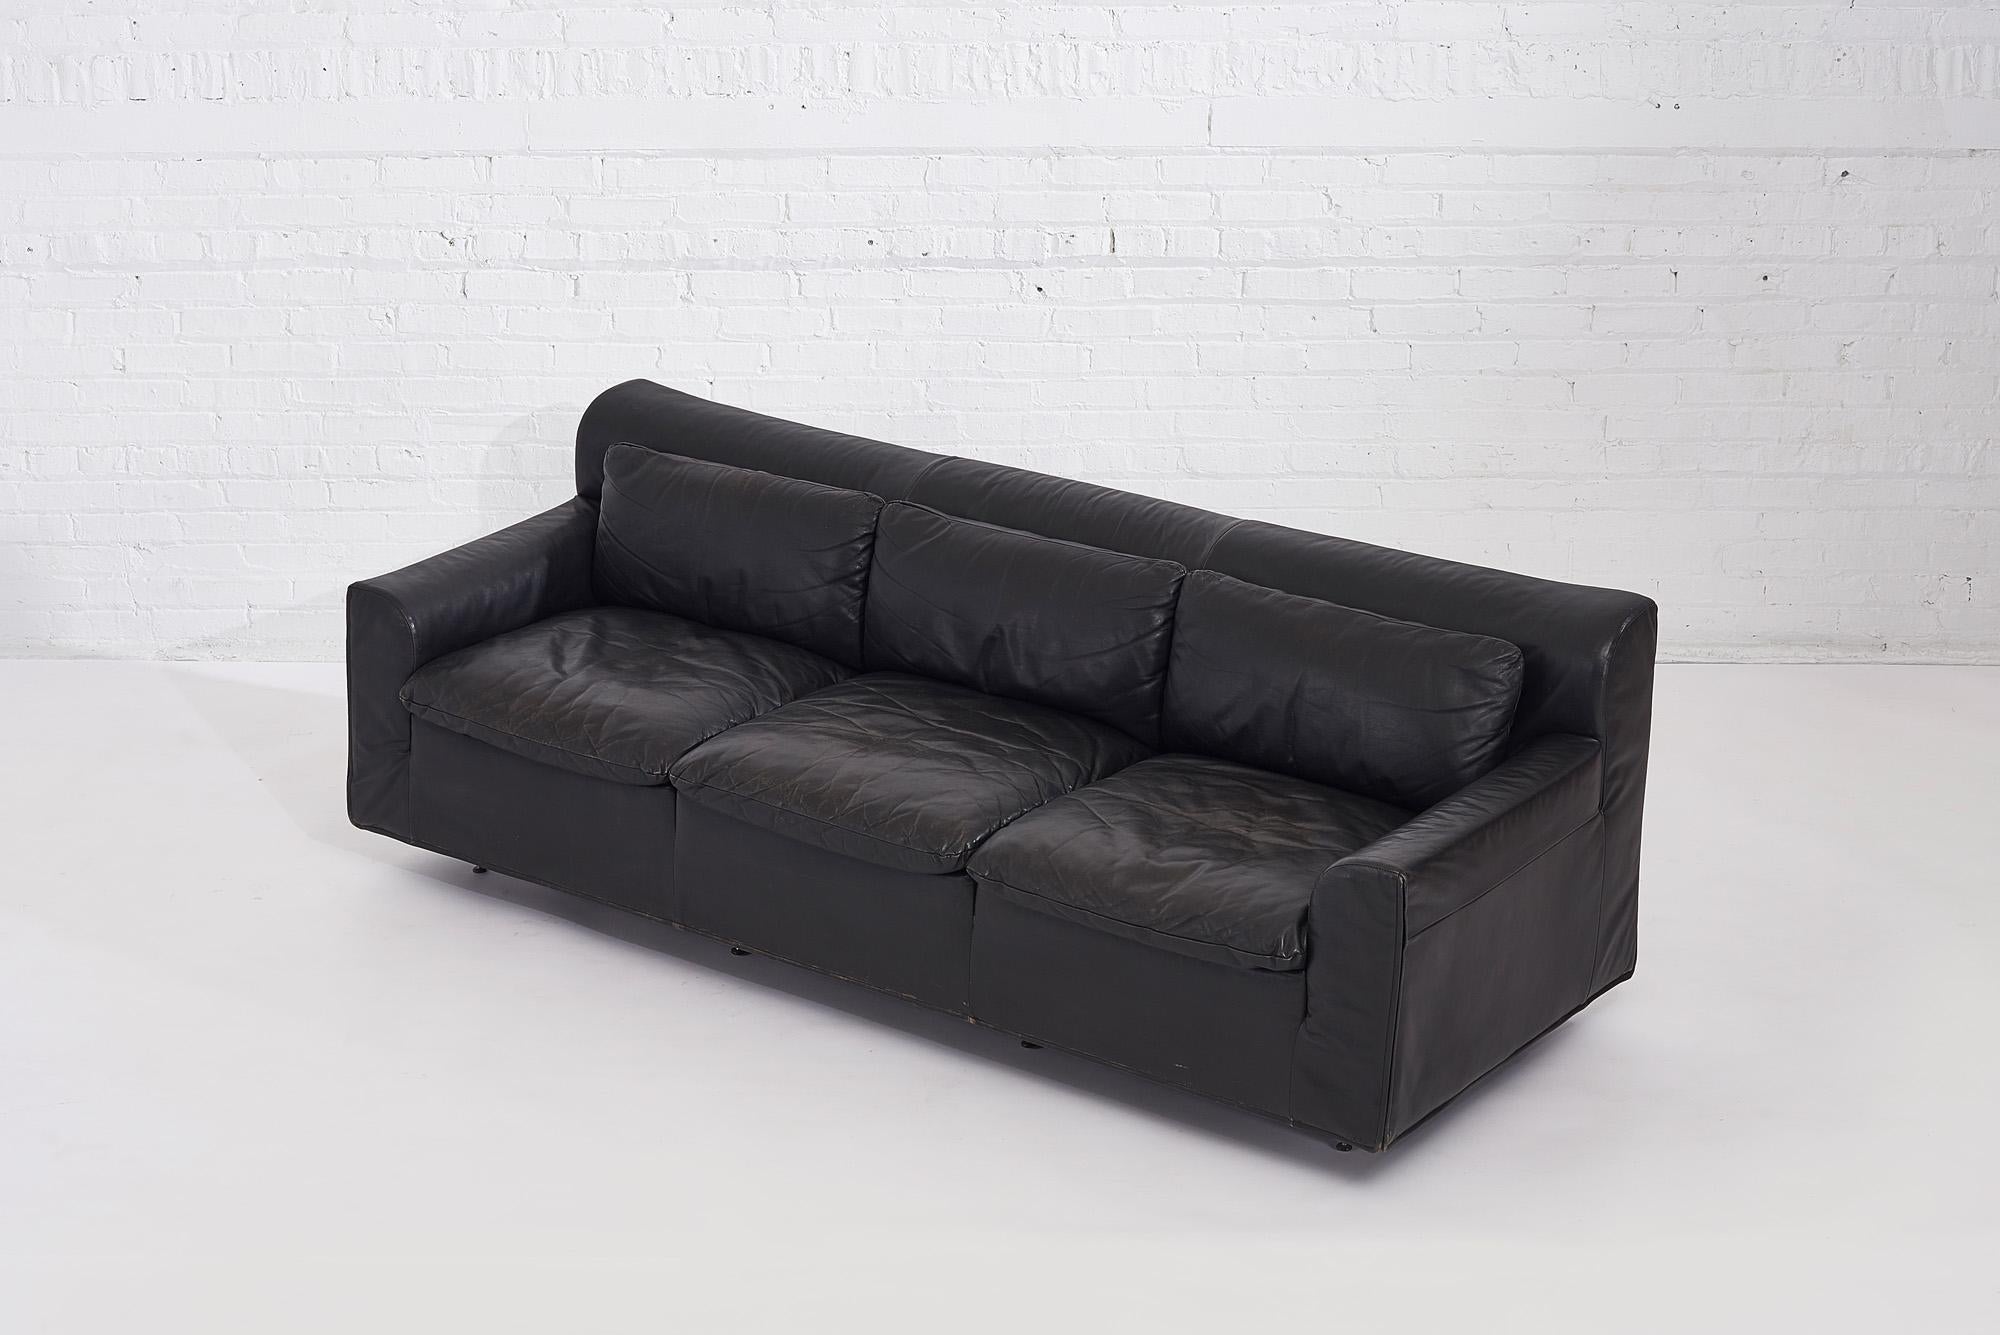 Late 20th Century Black Leather “Heli” Sofa by Otto Zapf for Knoll, 1980